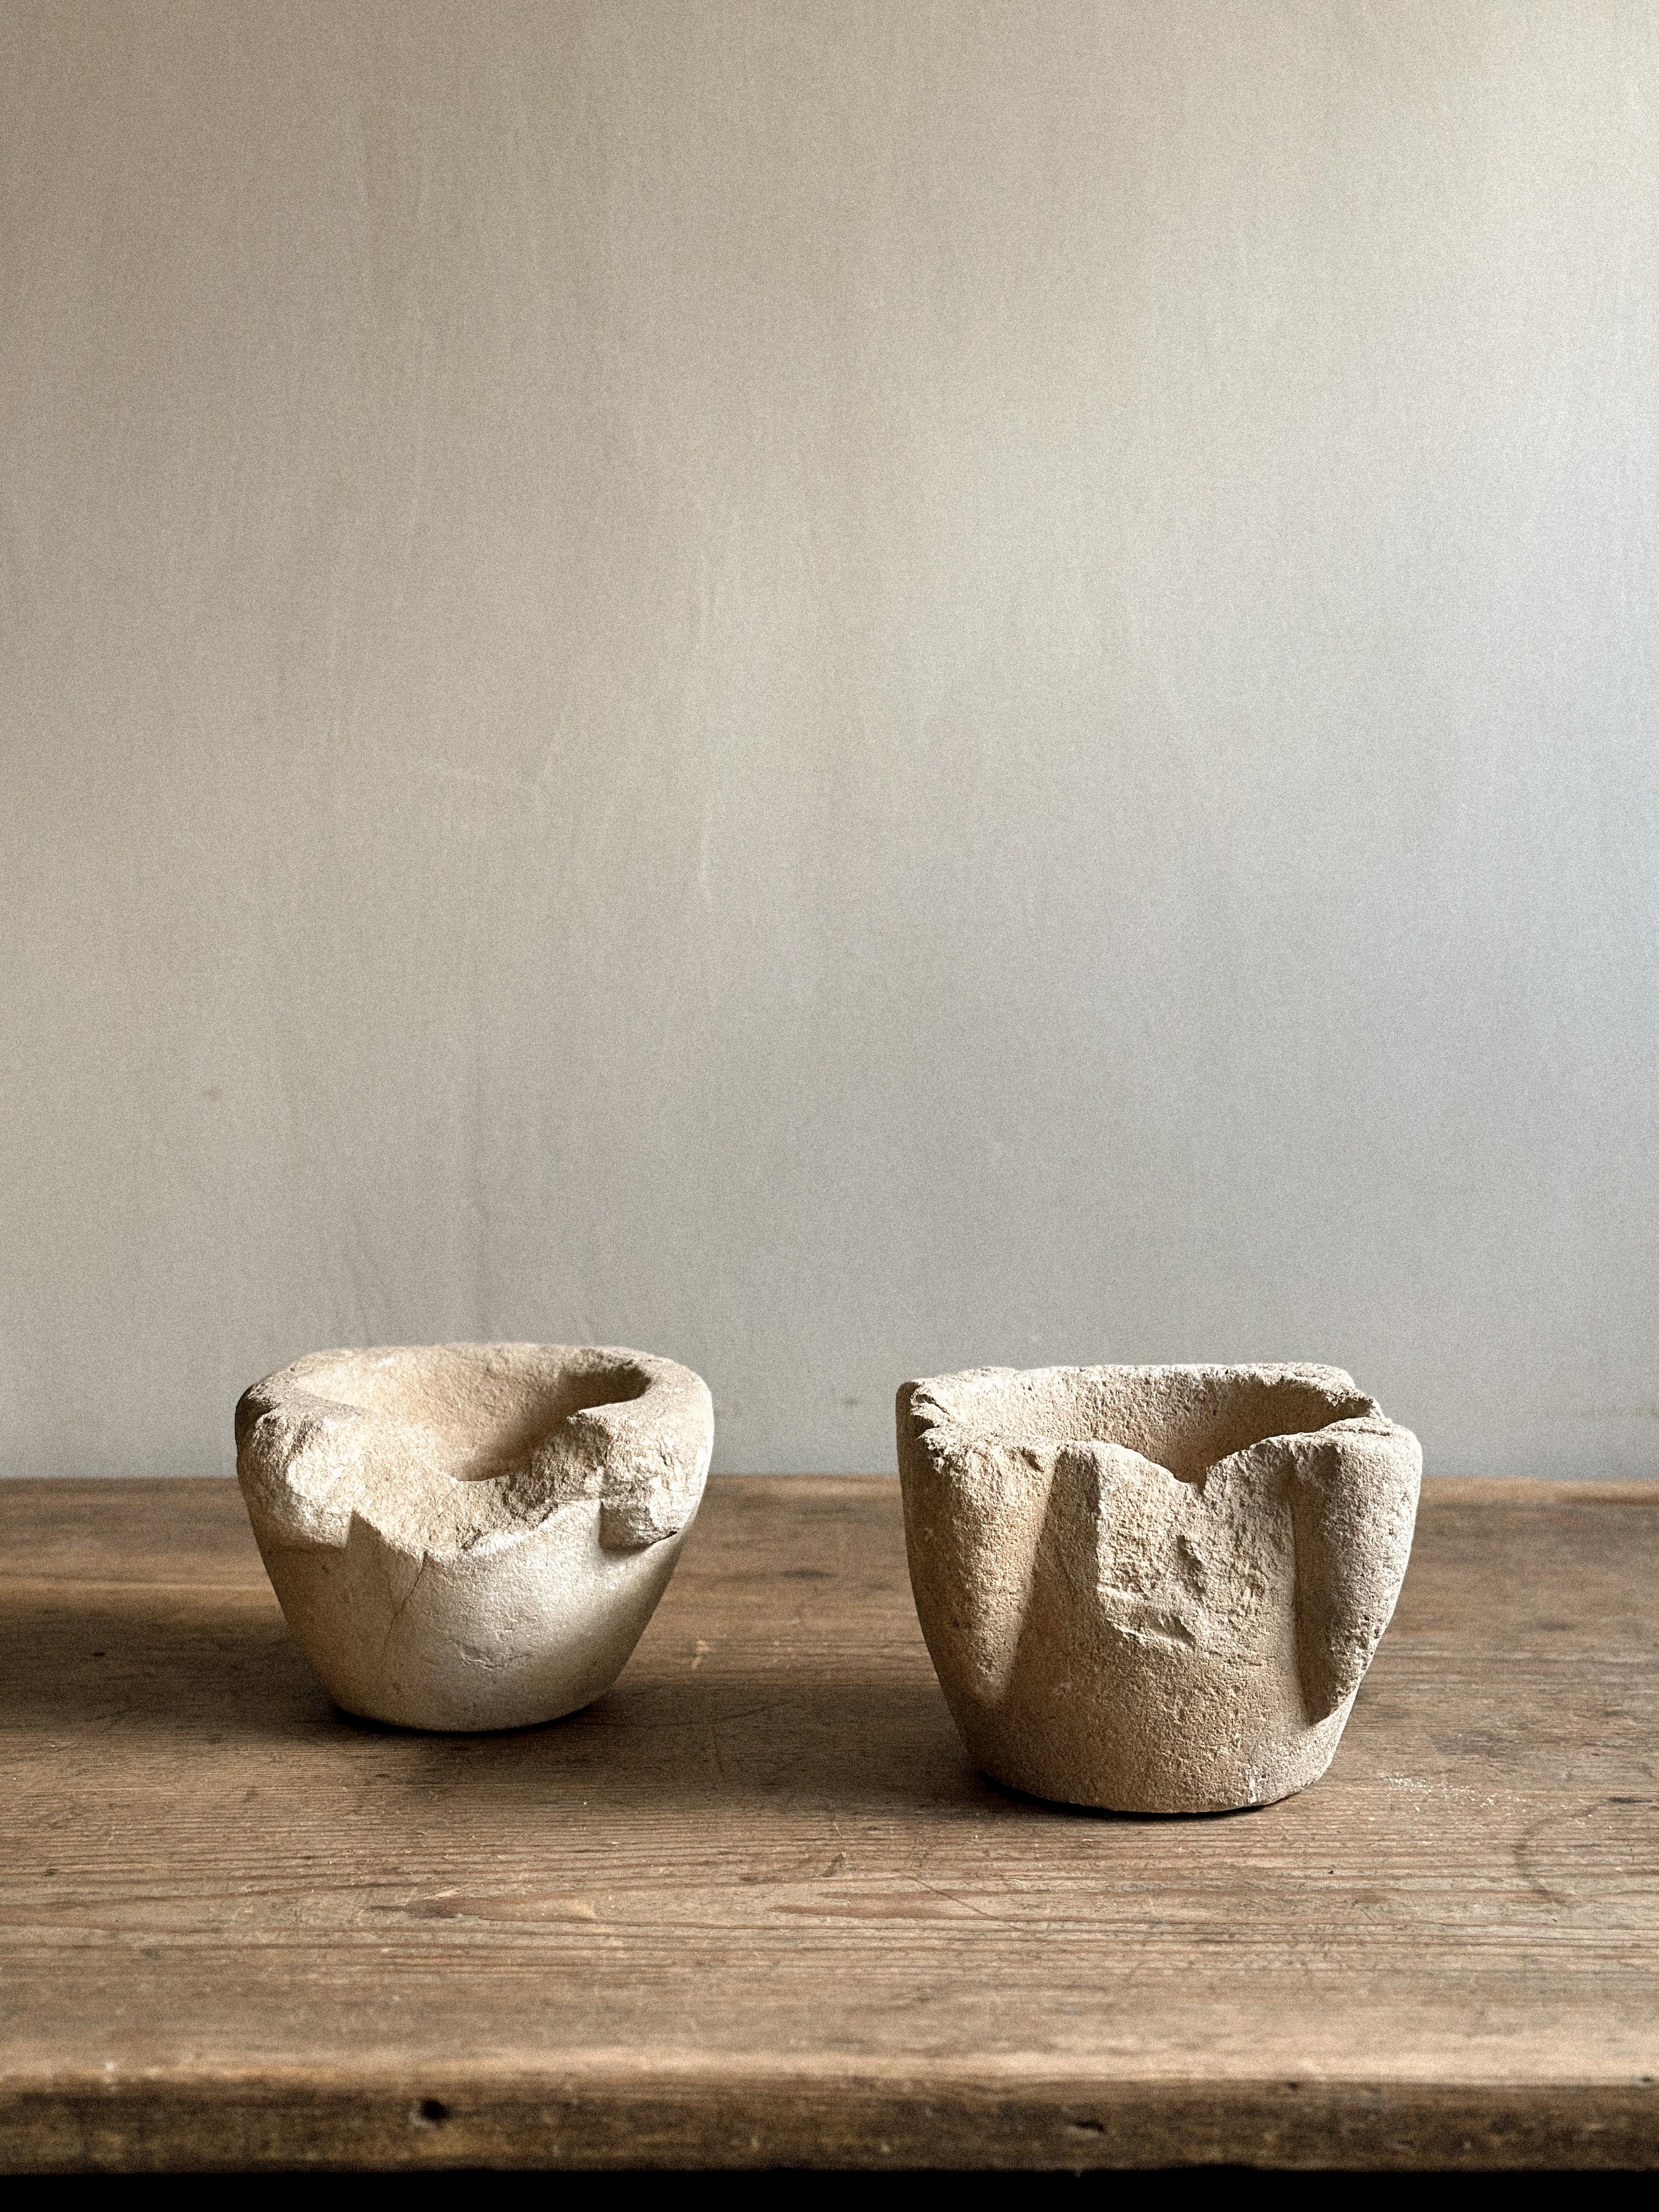 Spanish A Duo of Primitive Wabi Sabi Hand-Carved Stone Mortars, Spain, Early 1900s For Sale